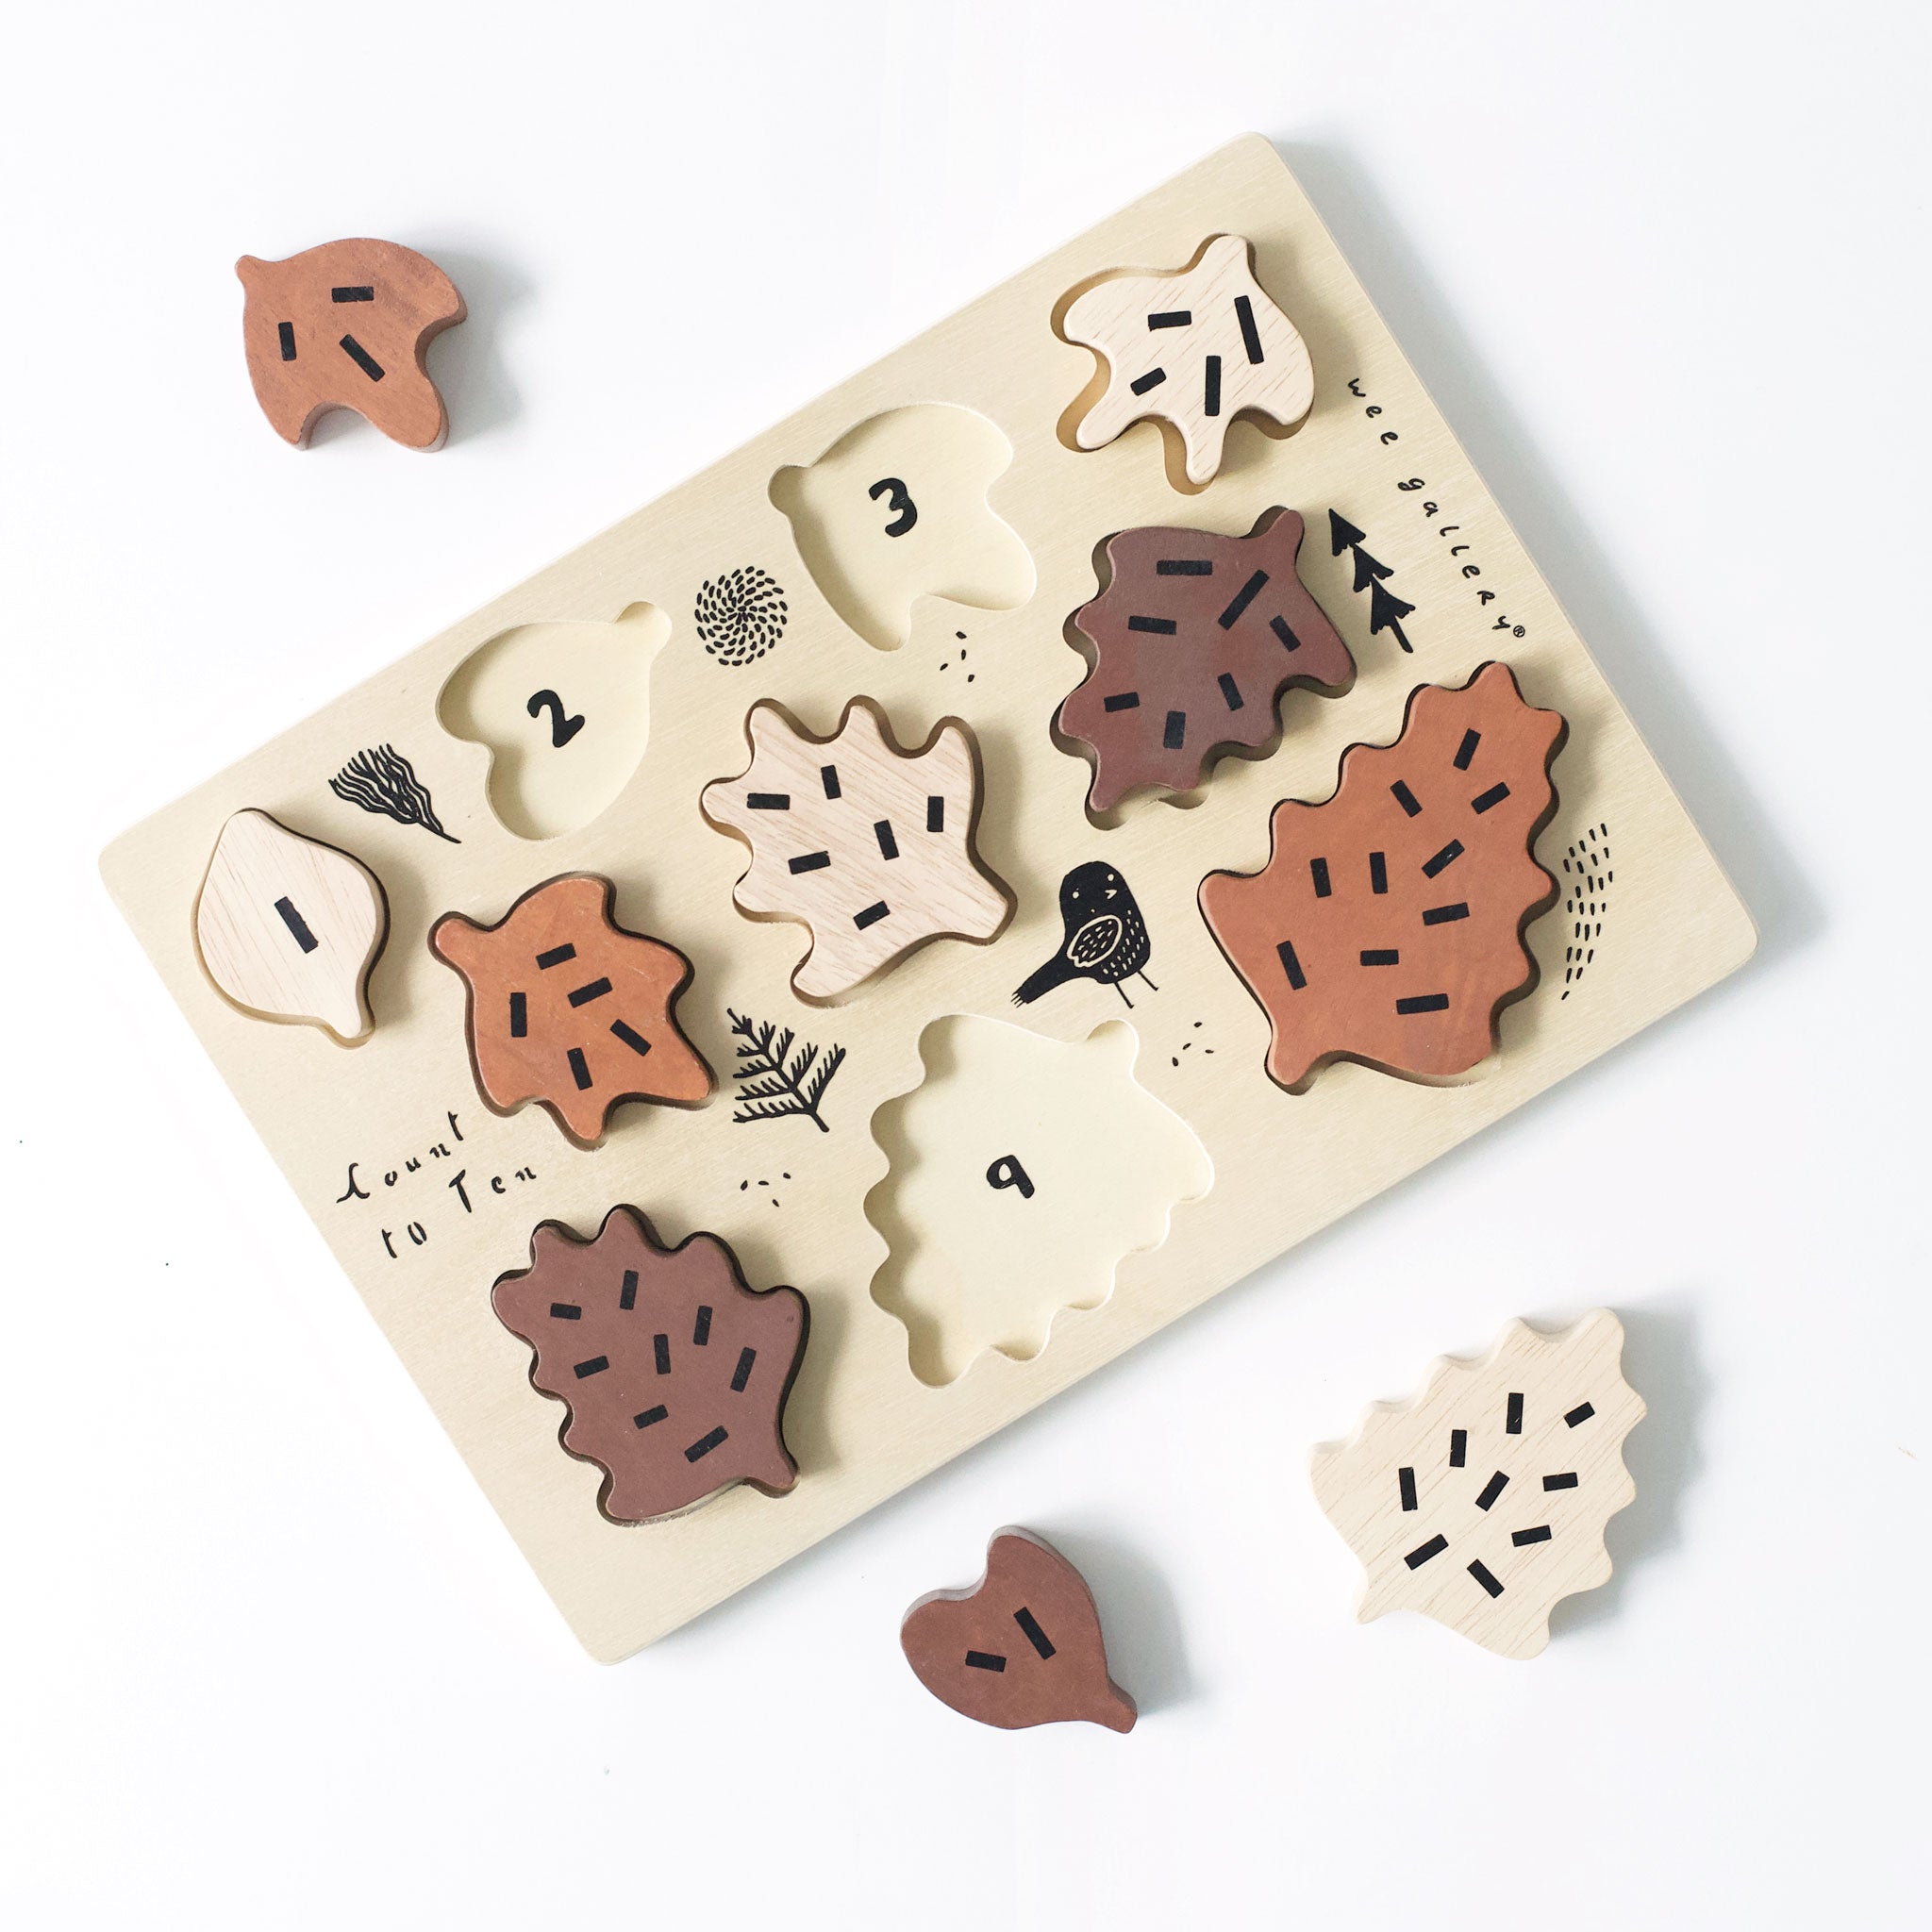 kids-wooden-tray-puzzle-educational-numbers-leaves.jpg